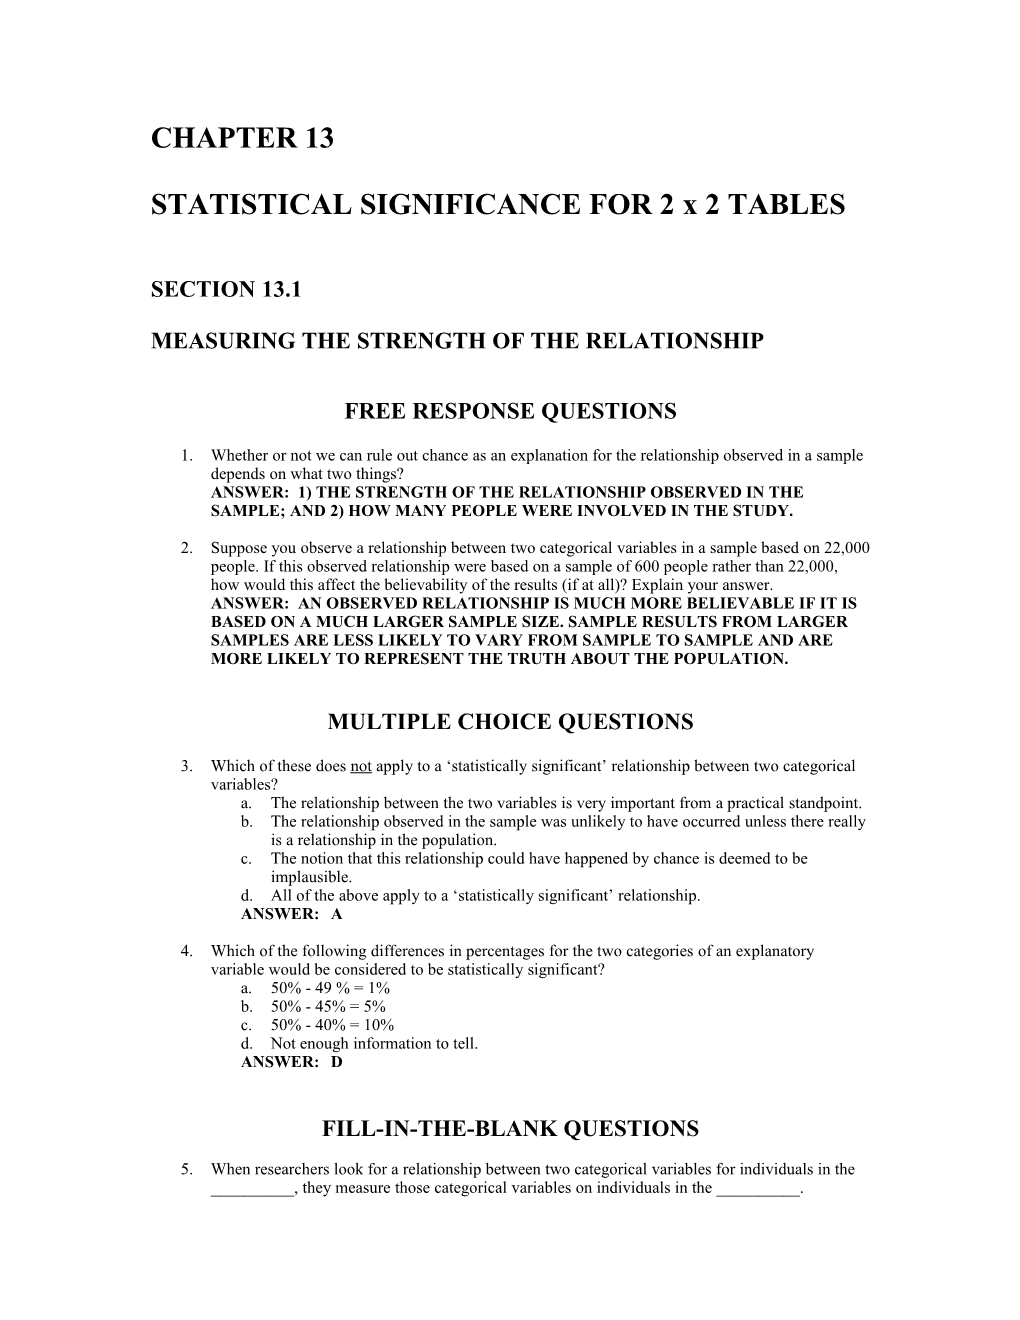 Statistical Significance for 2 X 2 Tables